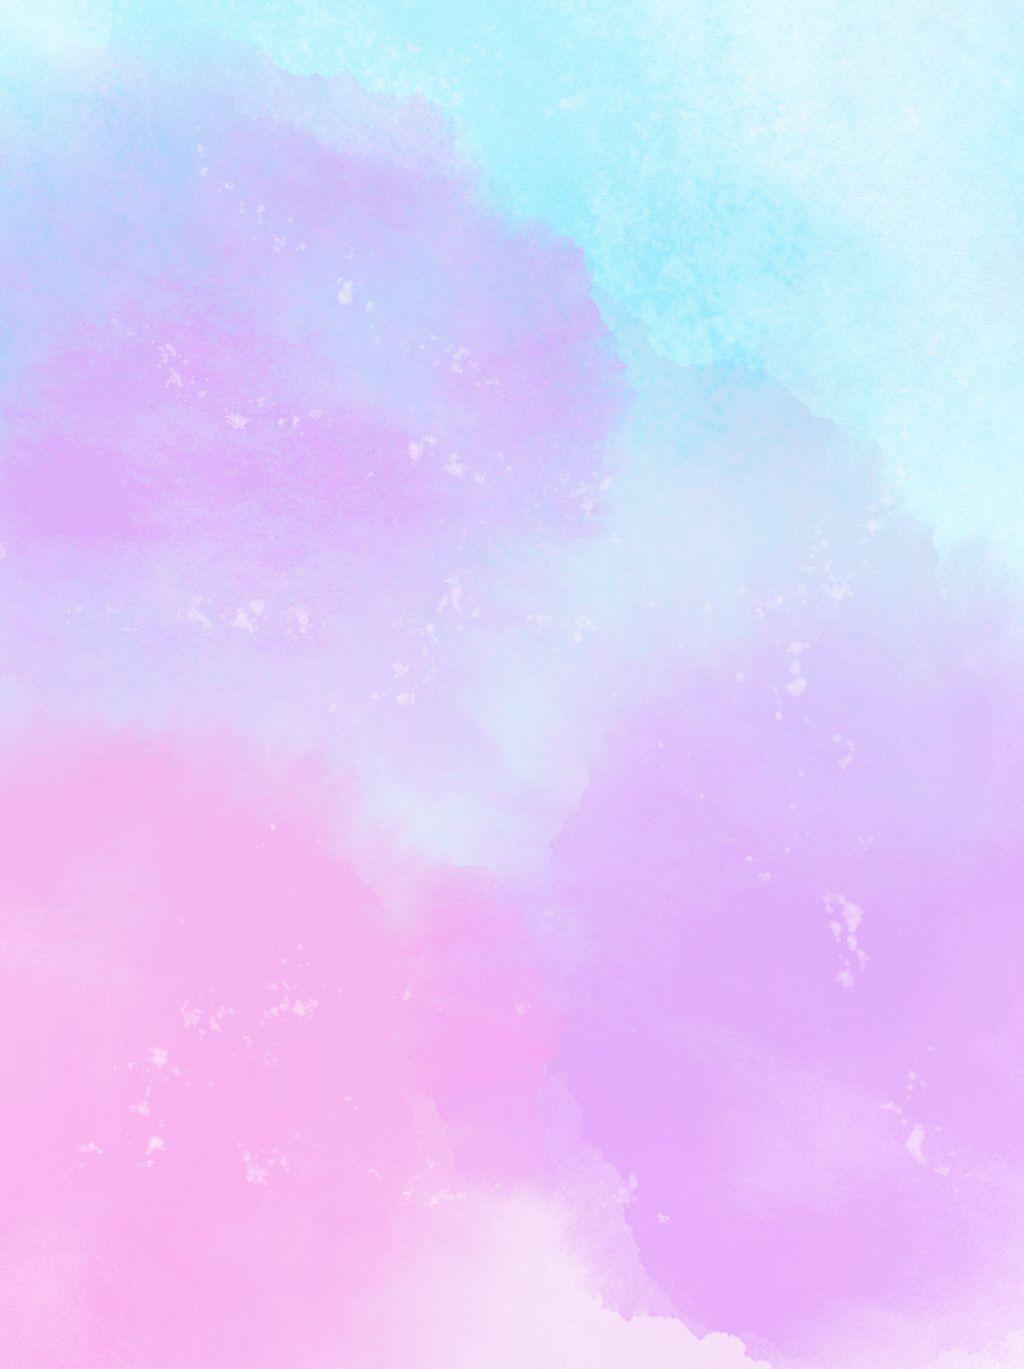 Pastel Pink And Purple Wallpapers Top Free Pastel Pink And Purple Backgrounds Wallpaperaccess